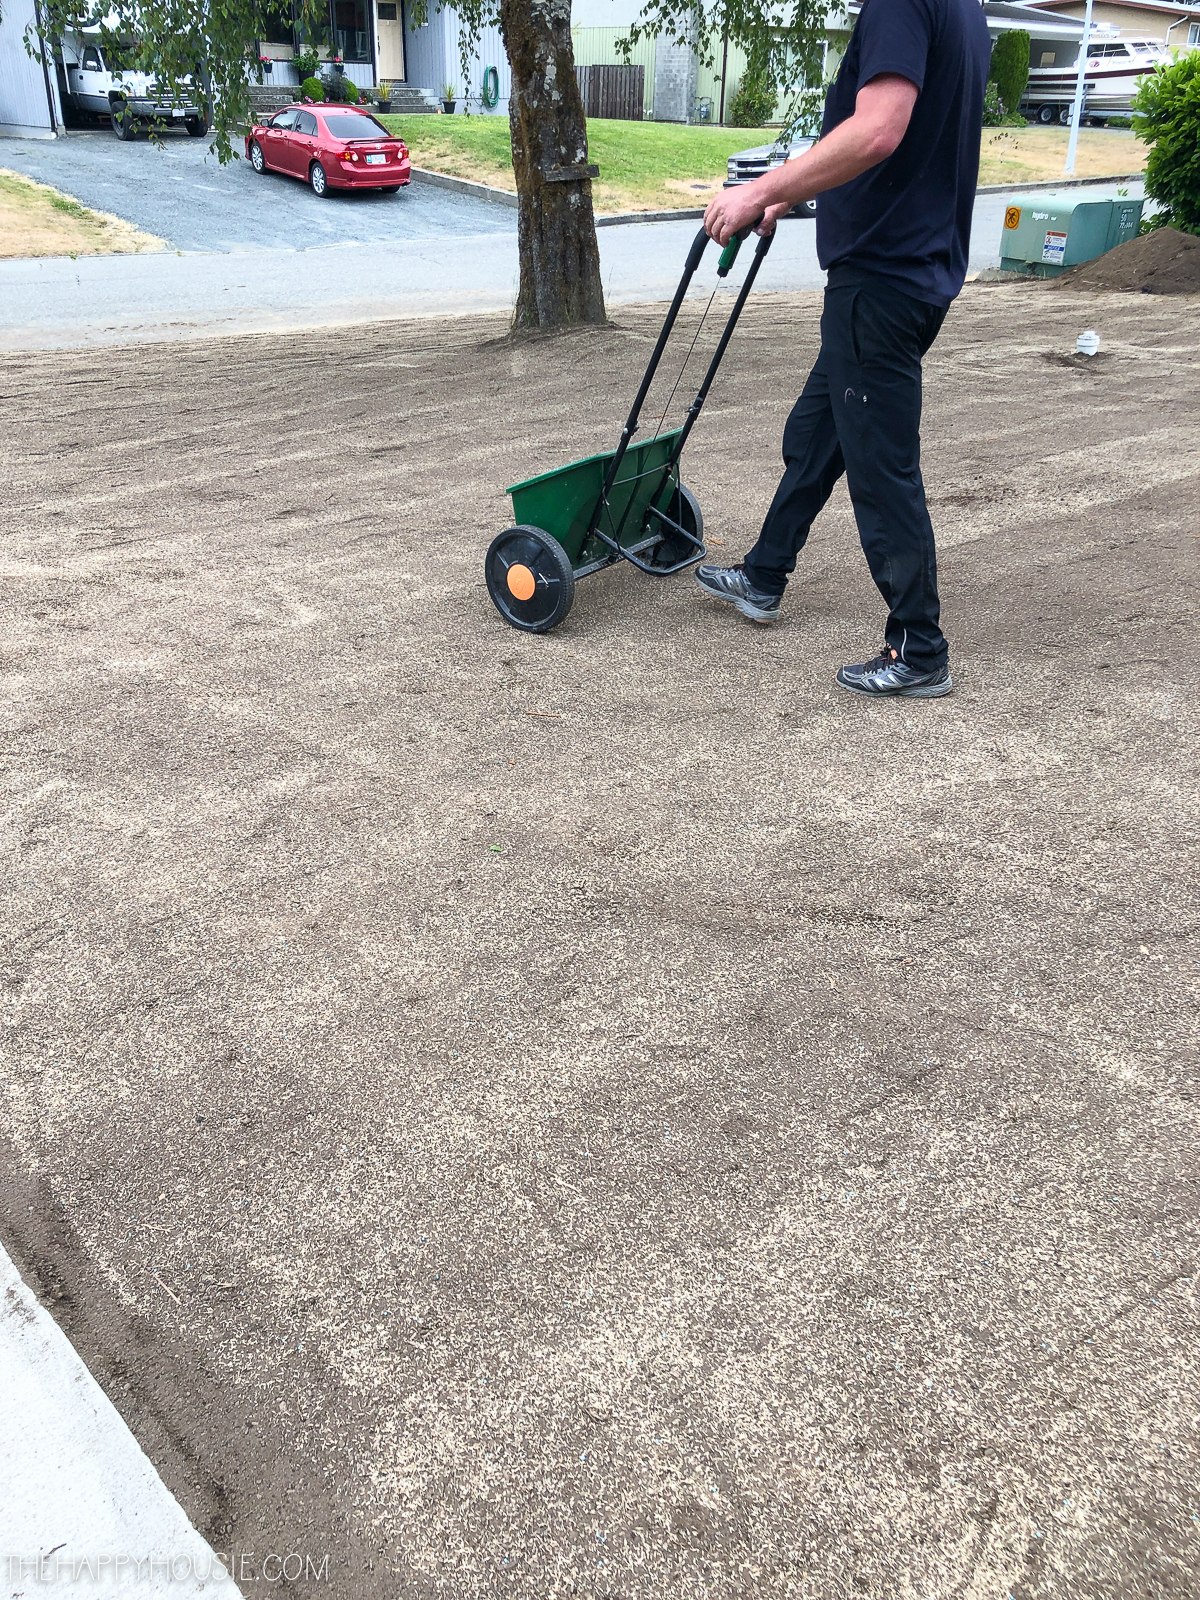 A man using a seed machine on the ground.